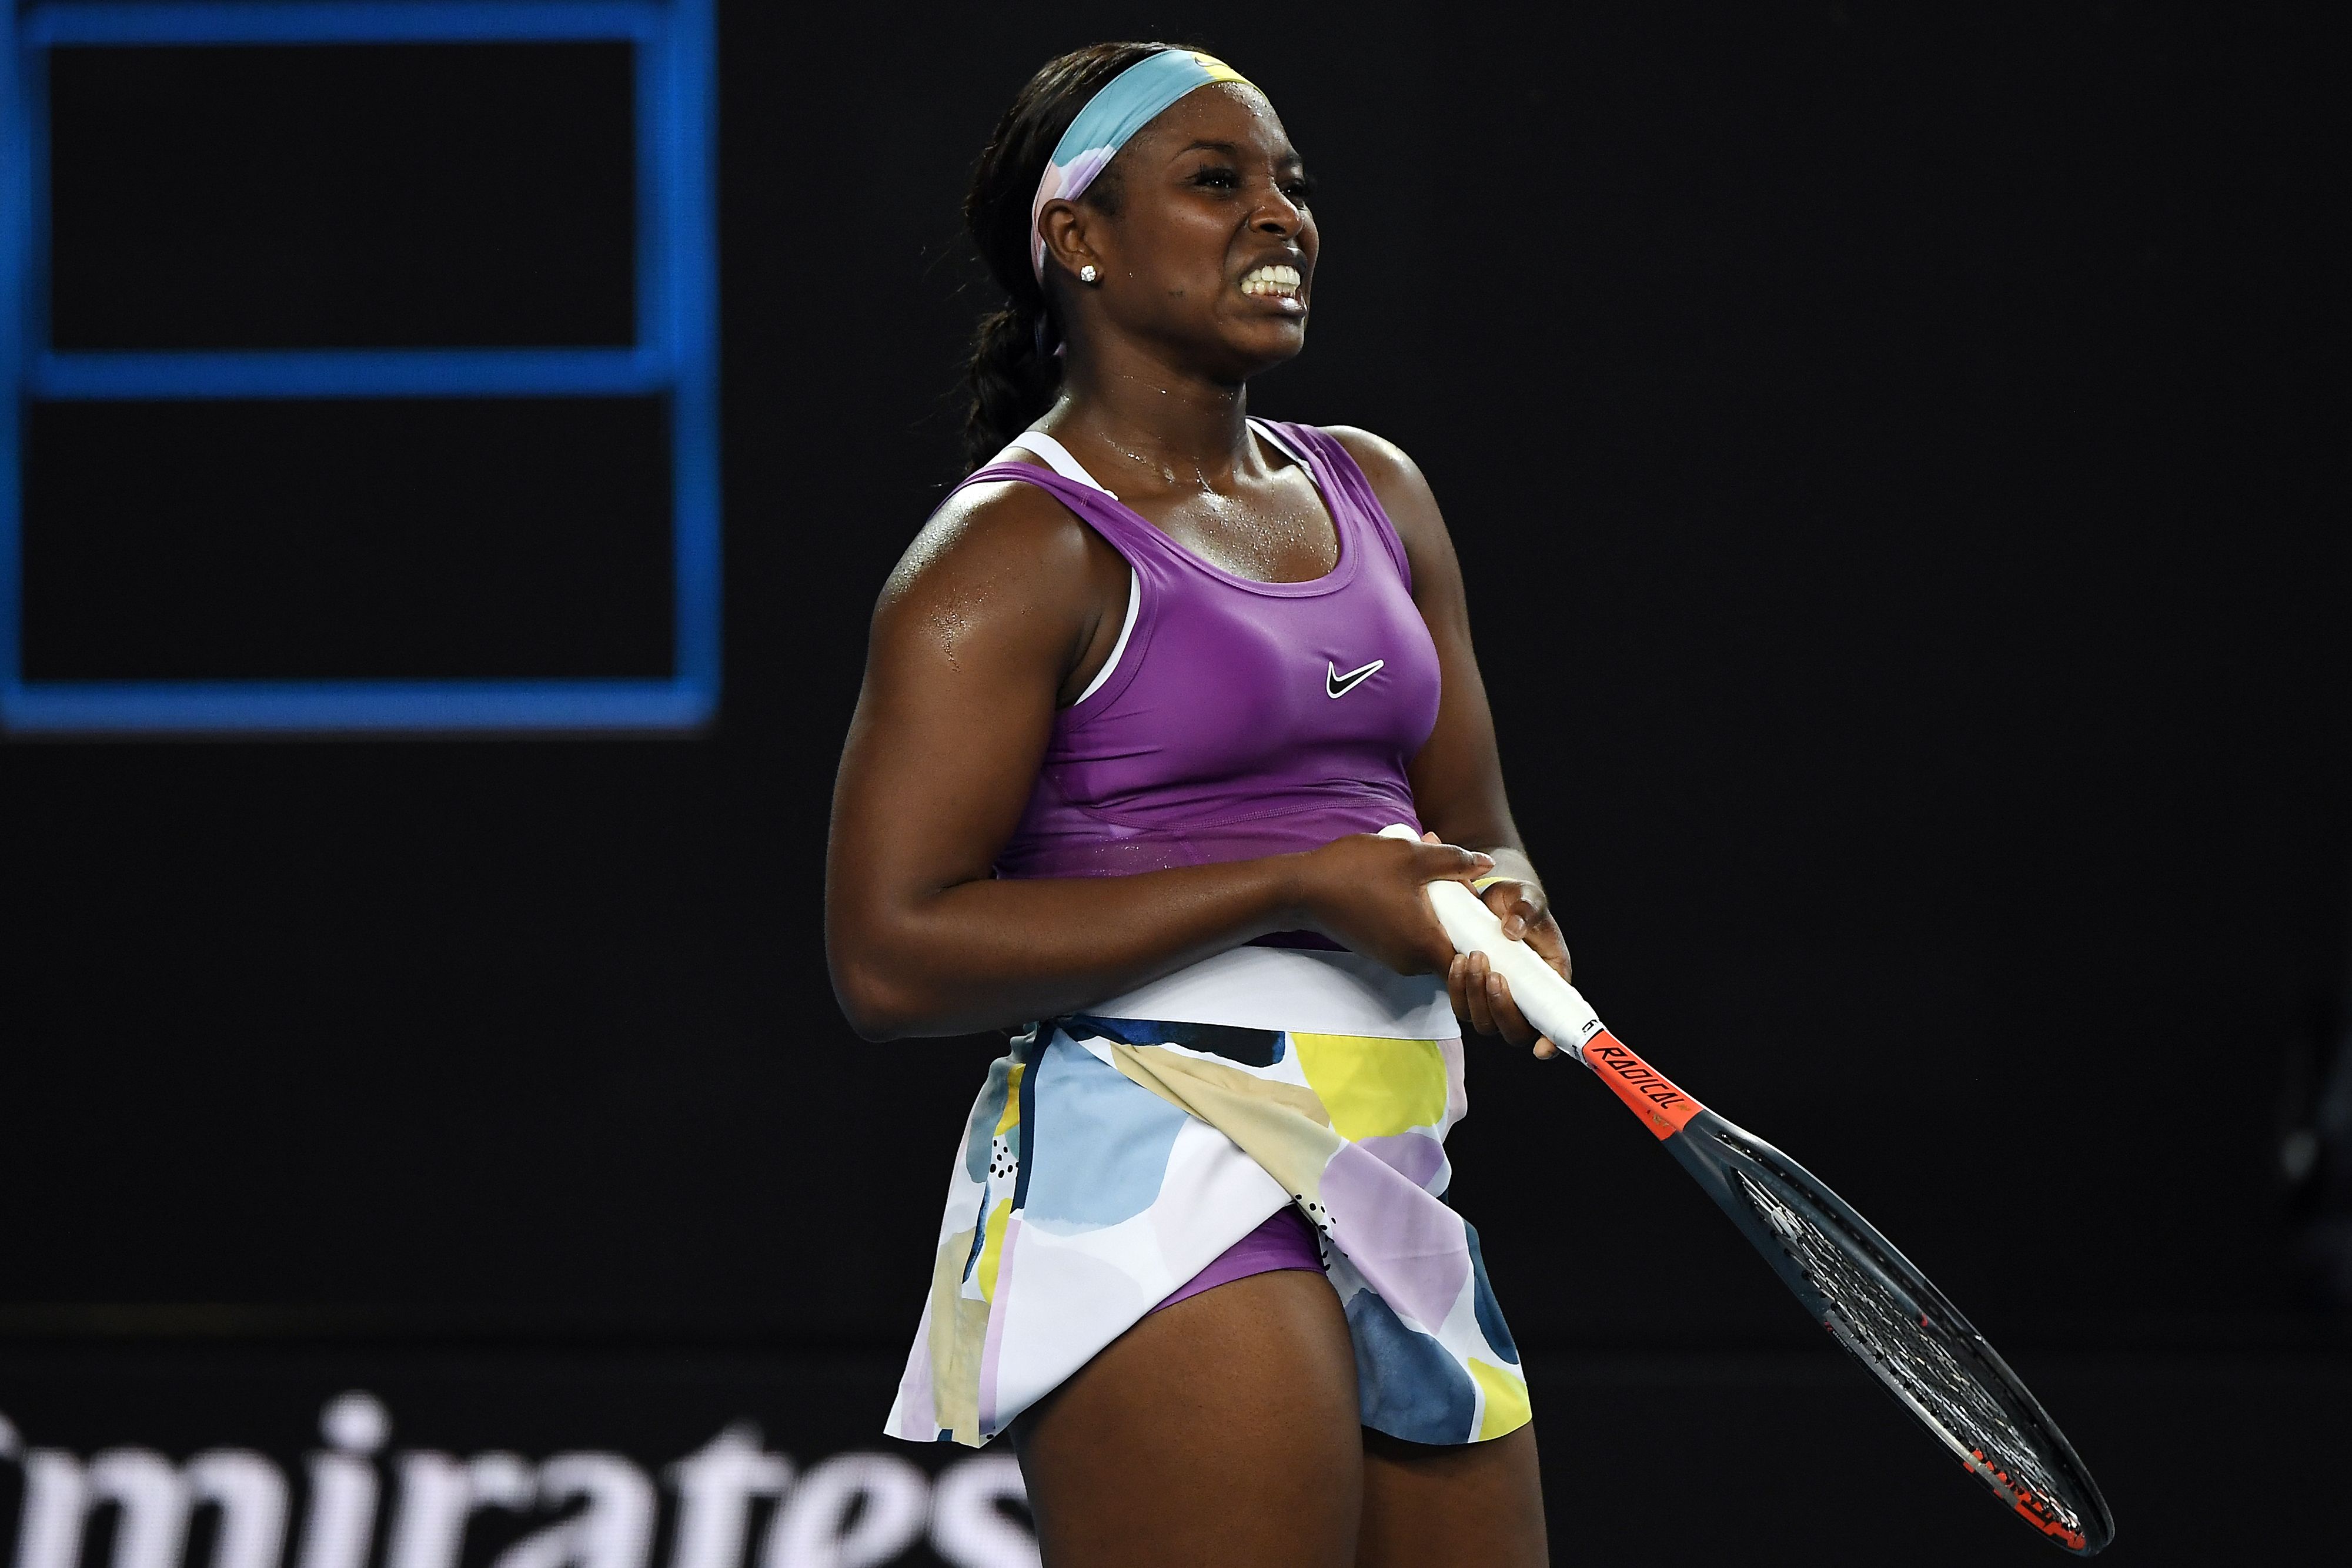 Learn More About Tennis Star Sloane Stephens